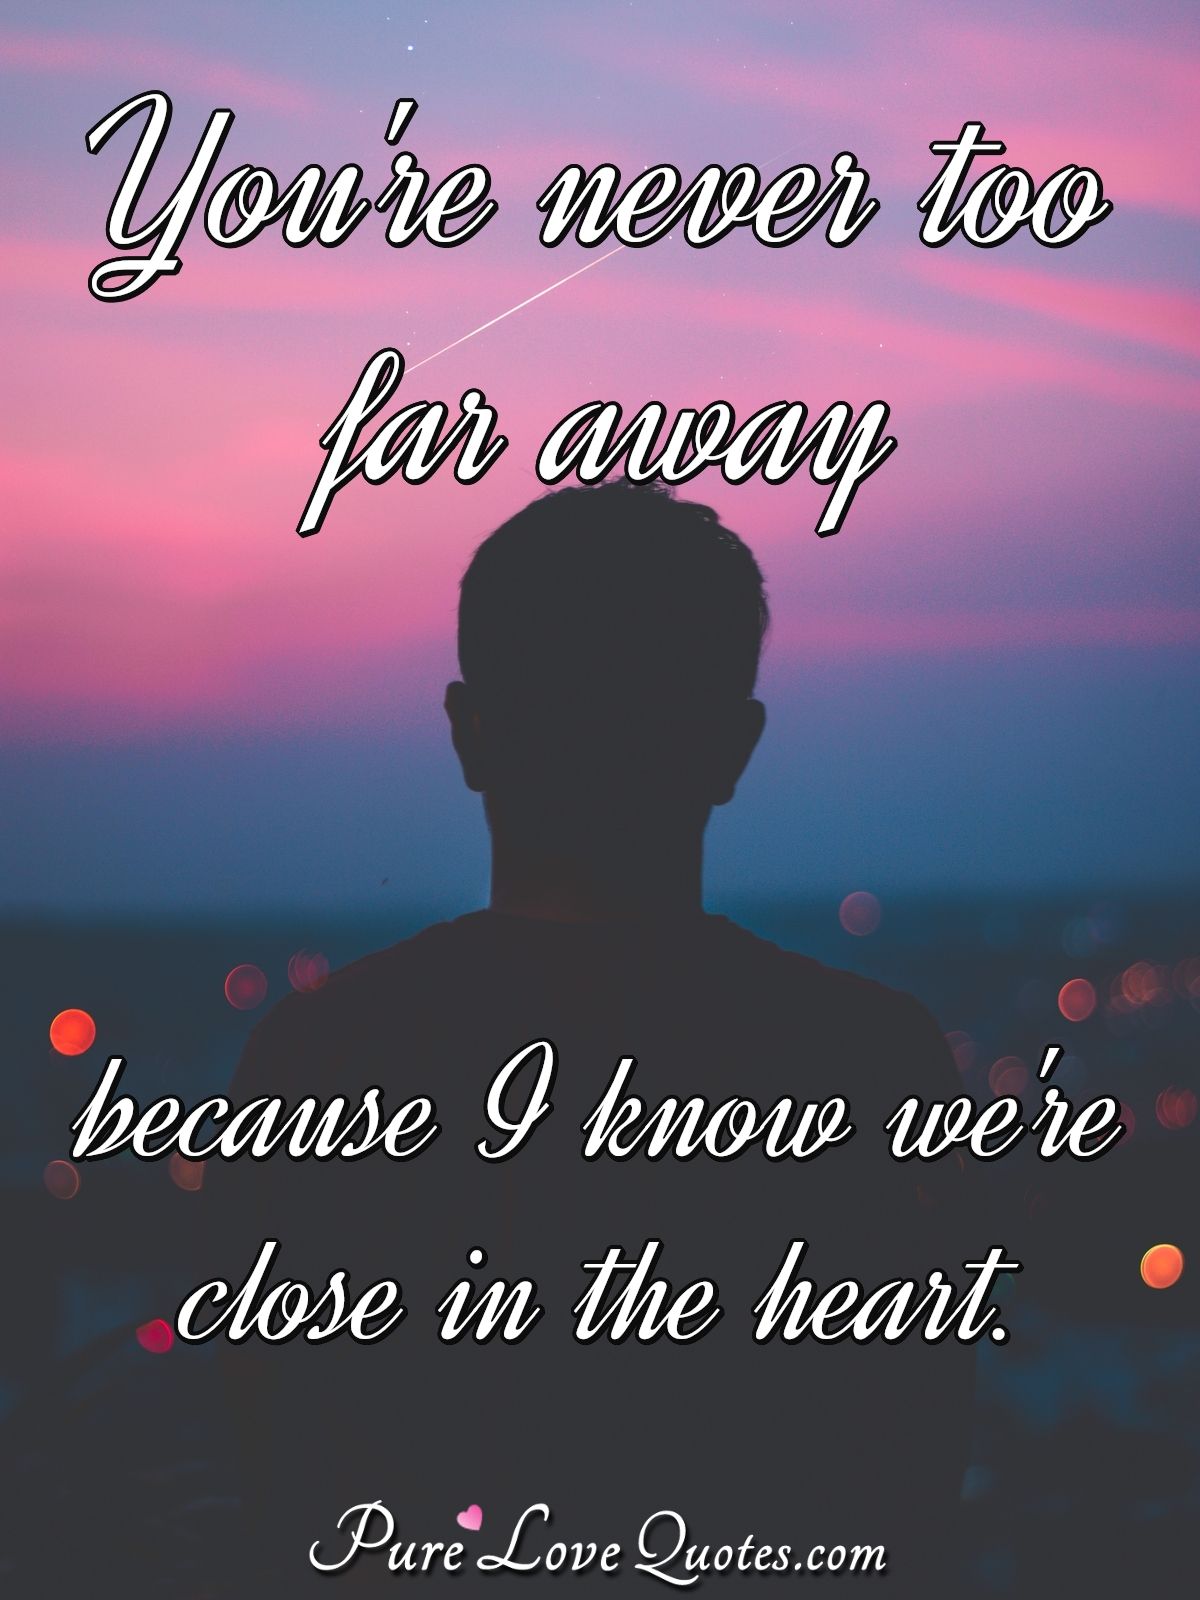 You're never too far away because I know we're close in the heart ...